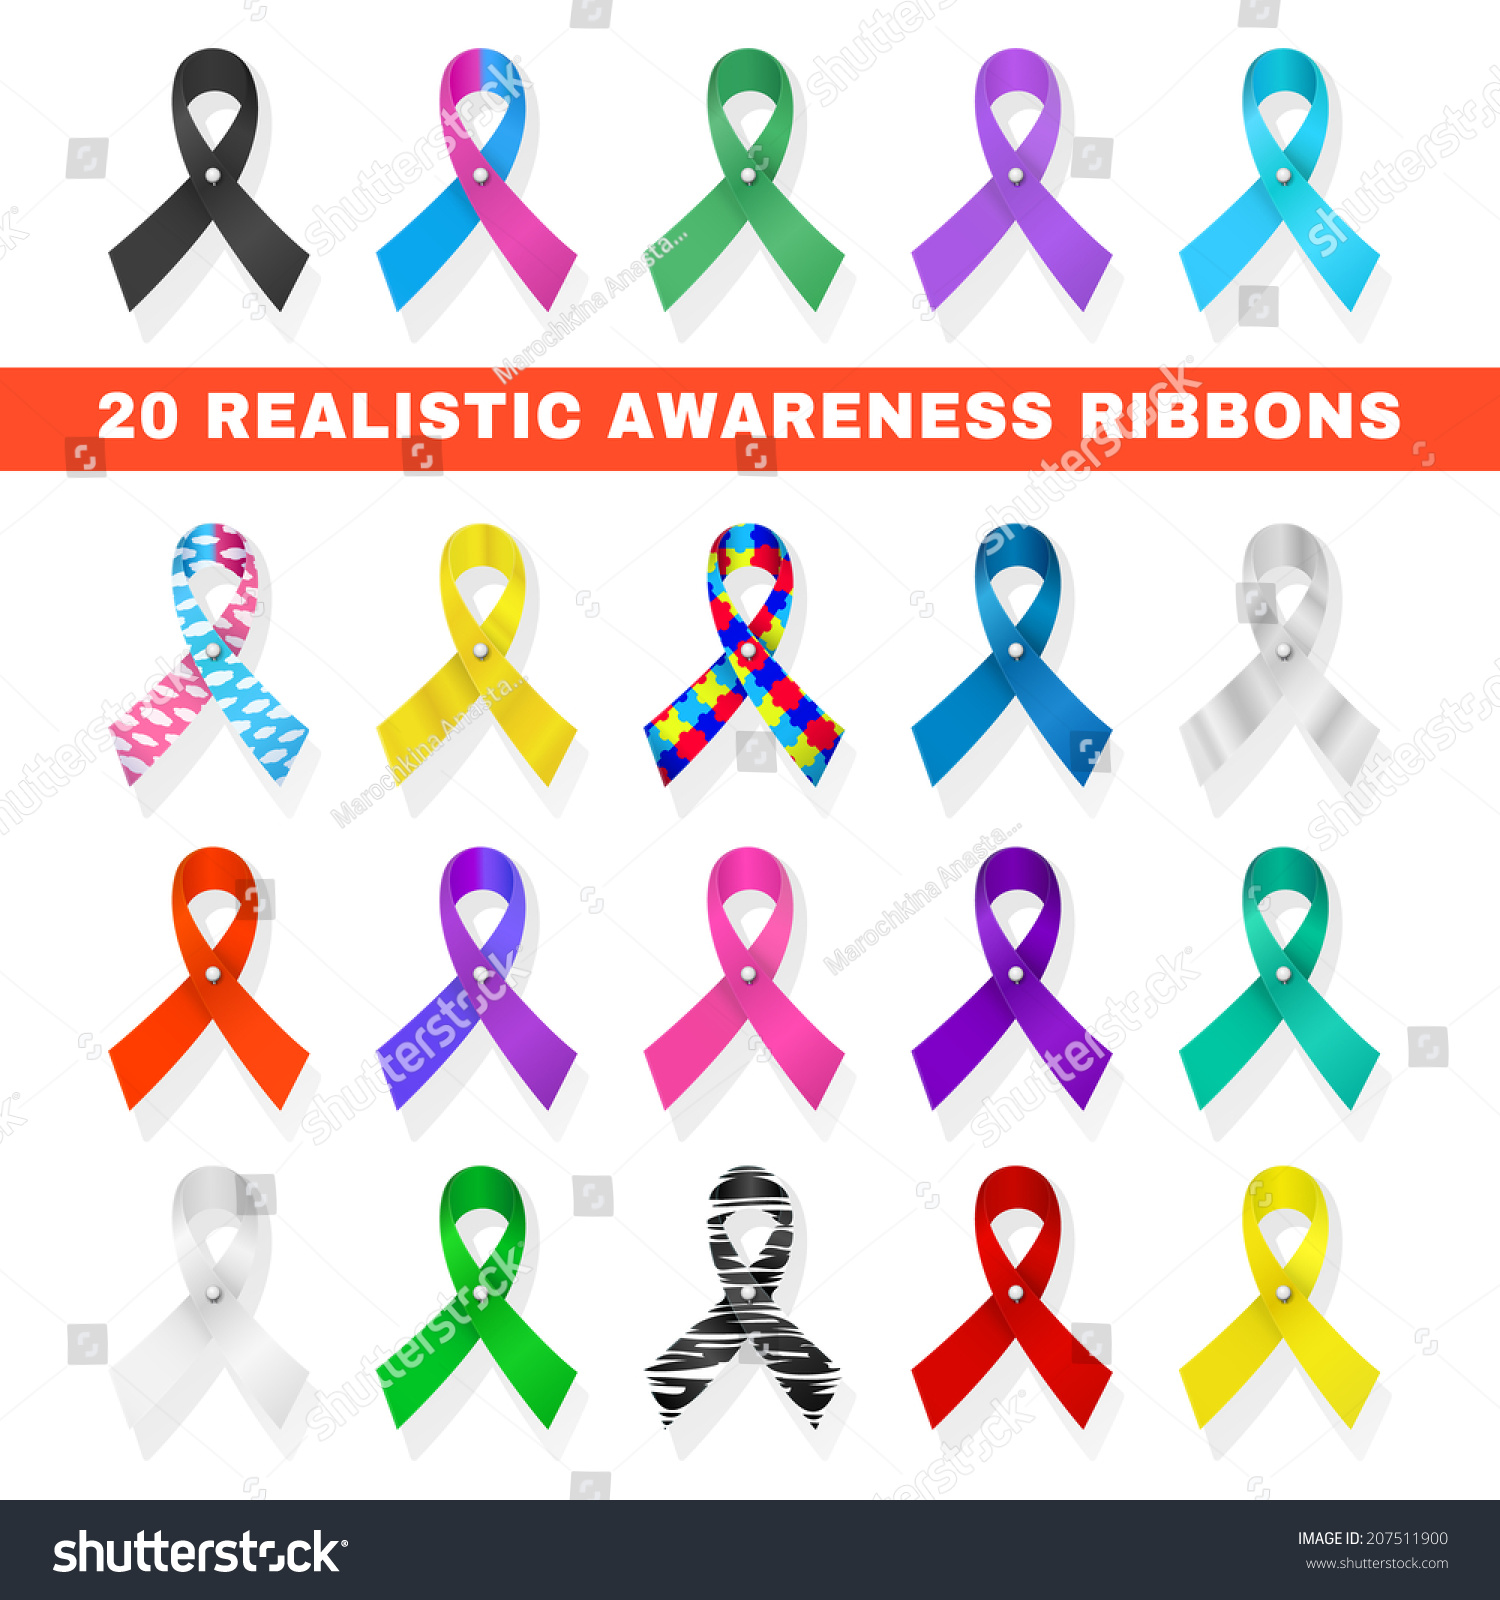 SVG of awareness ribbon icons with different ribbons in the form of loops, symbolizing support of social problems on a white background svg